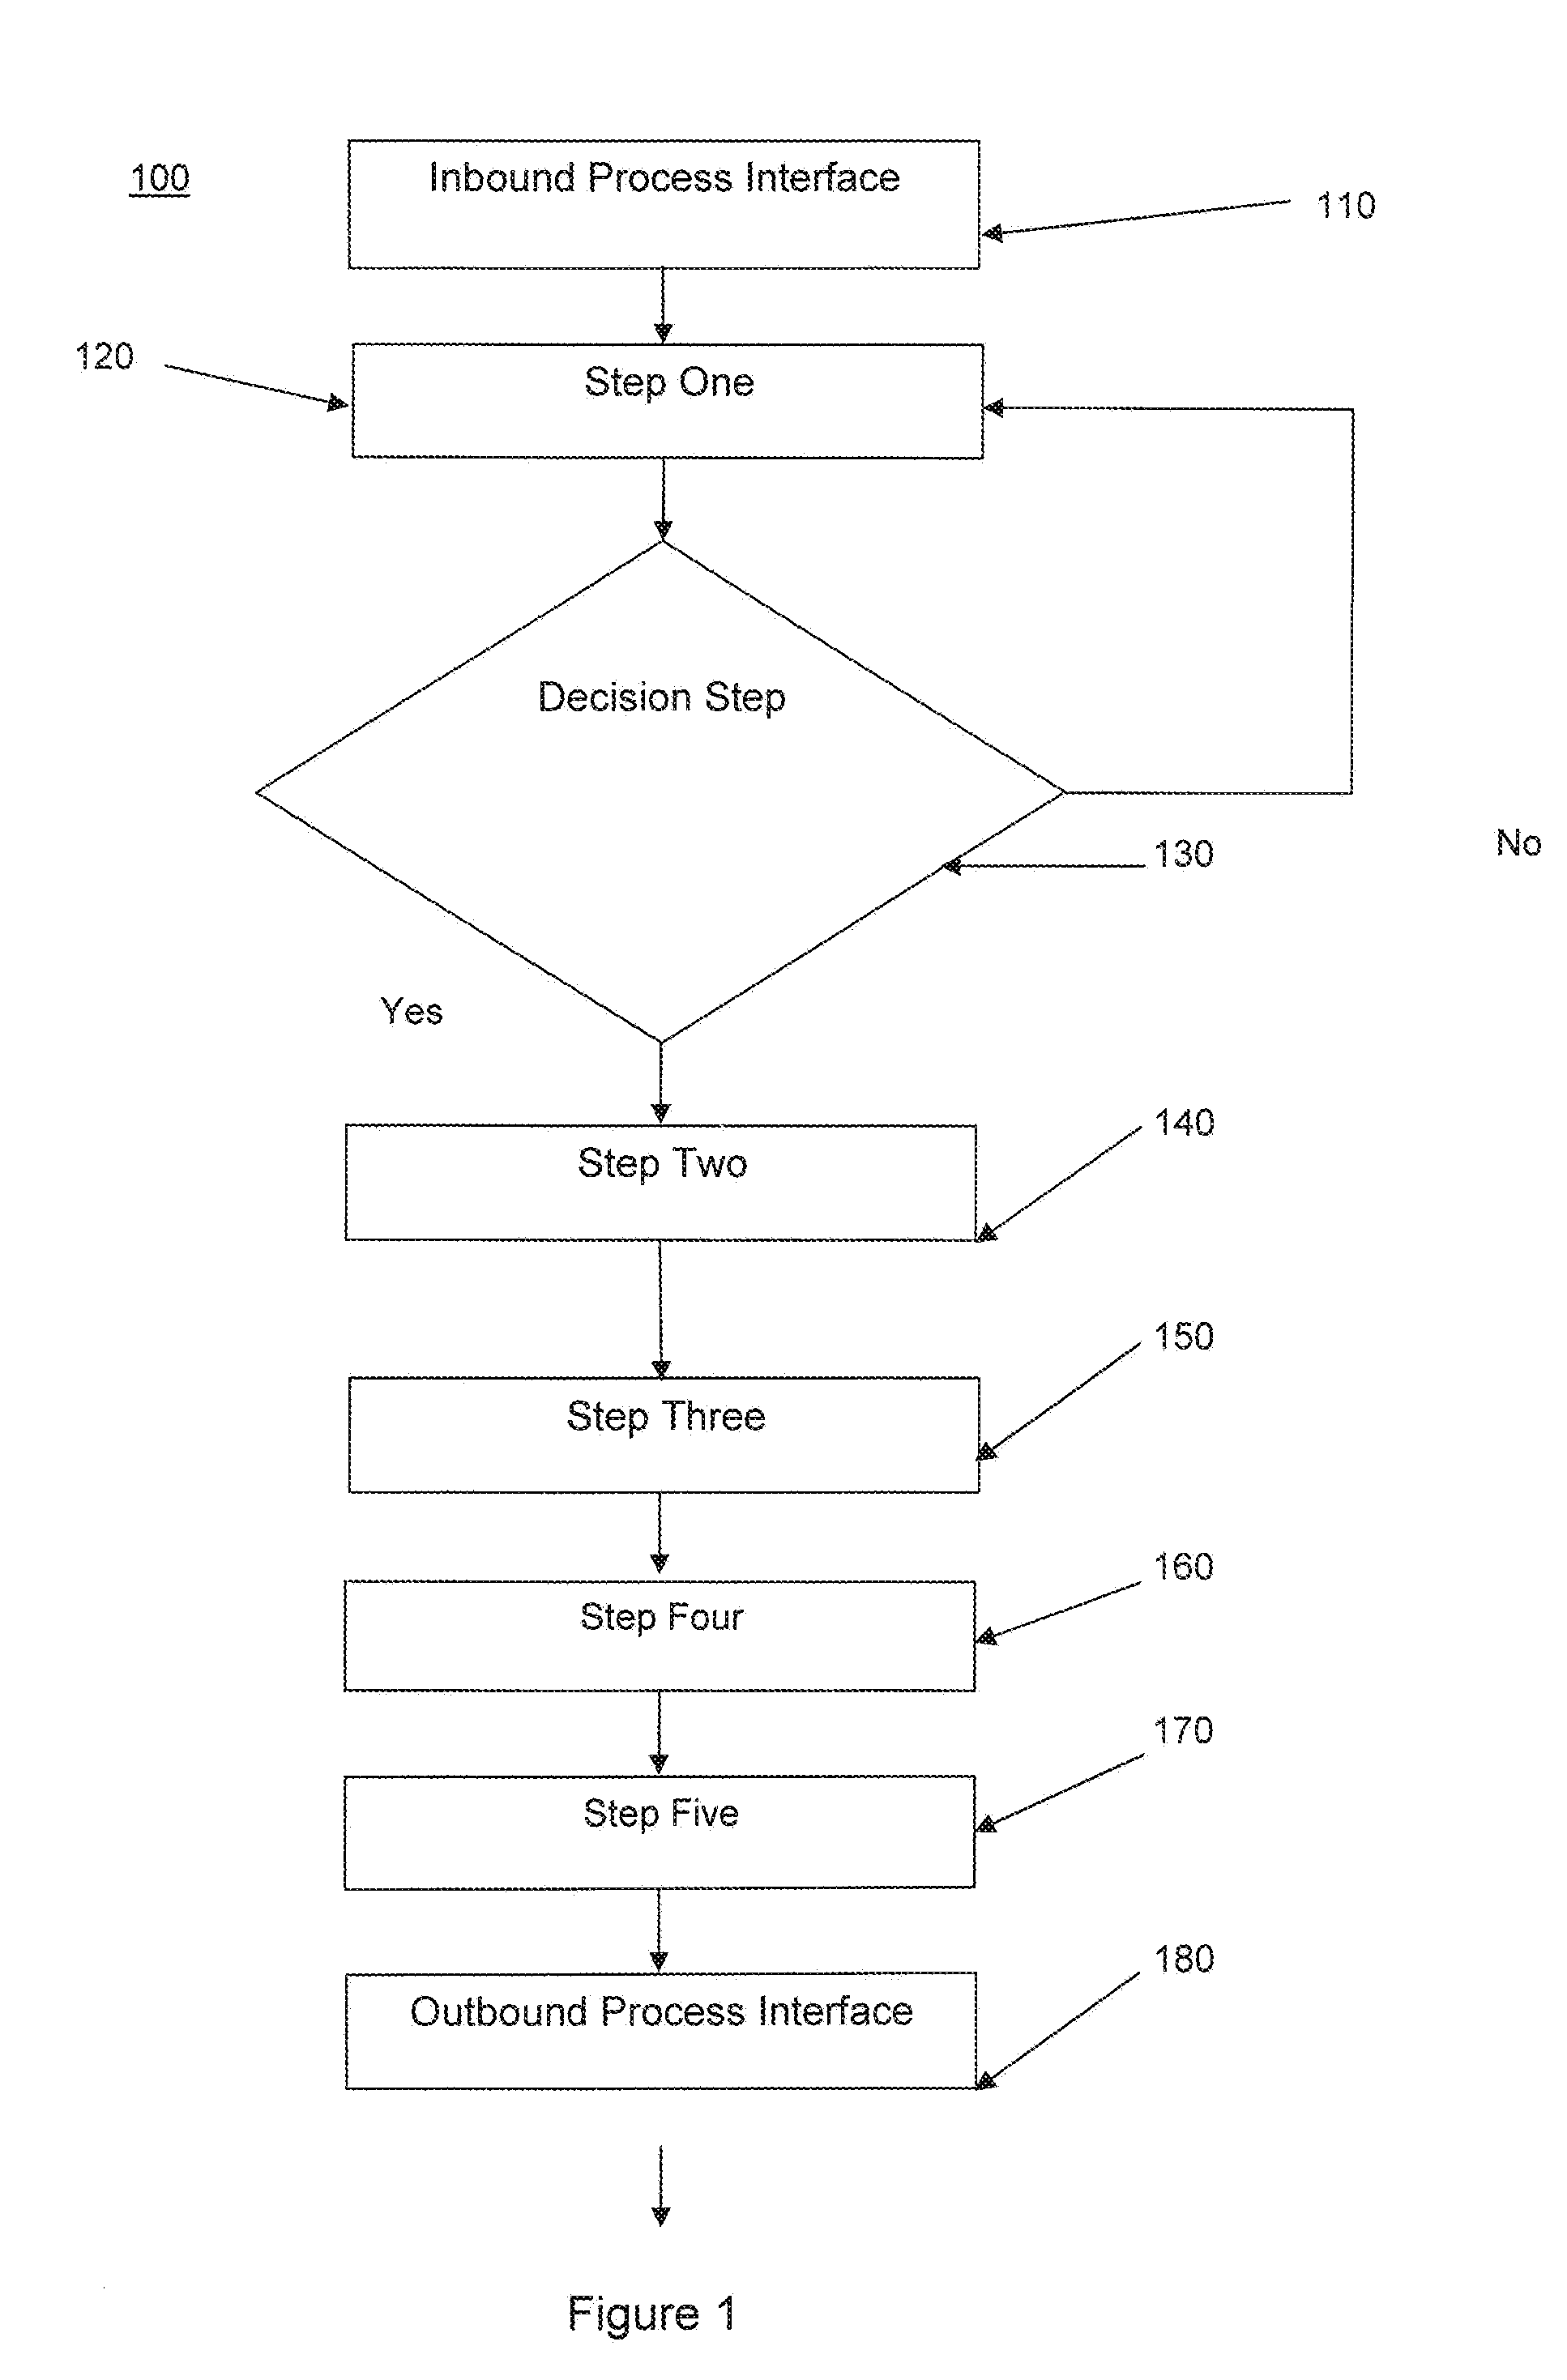 System and method to create process reference maps from links described in a business process model